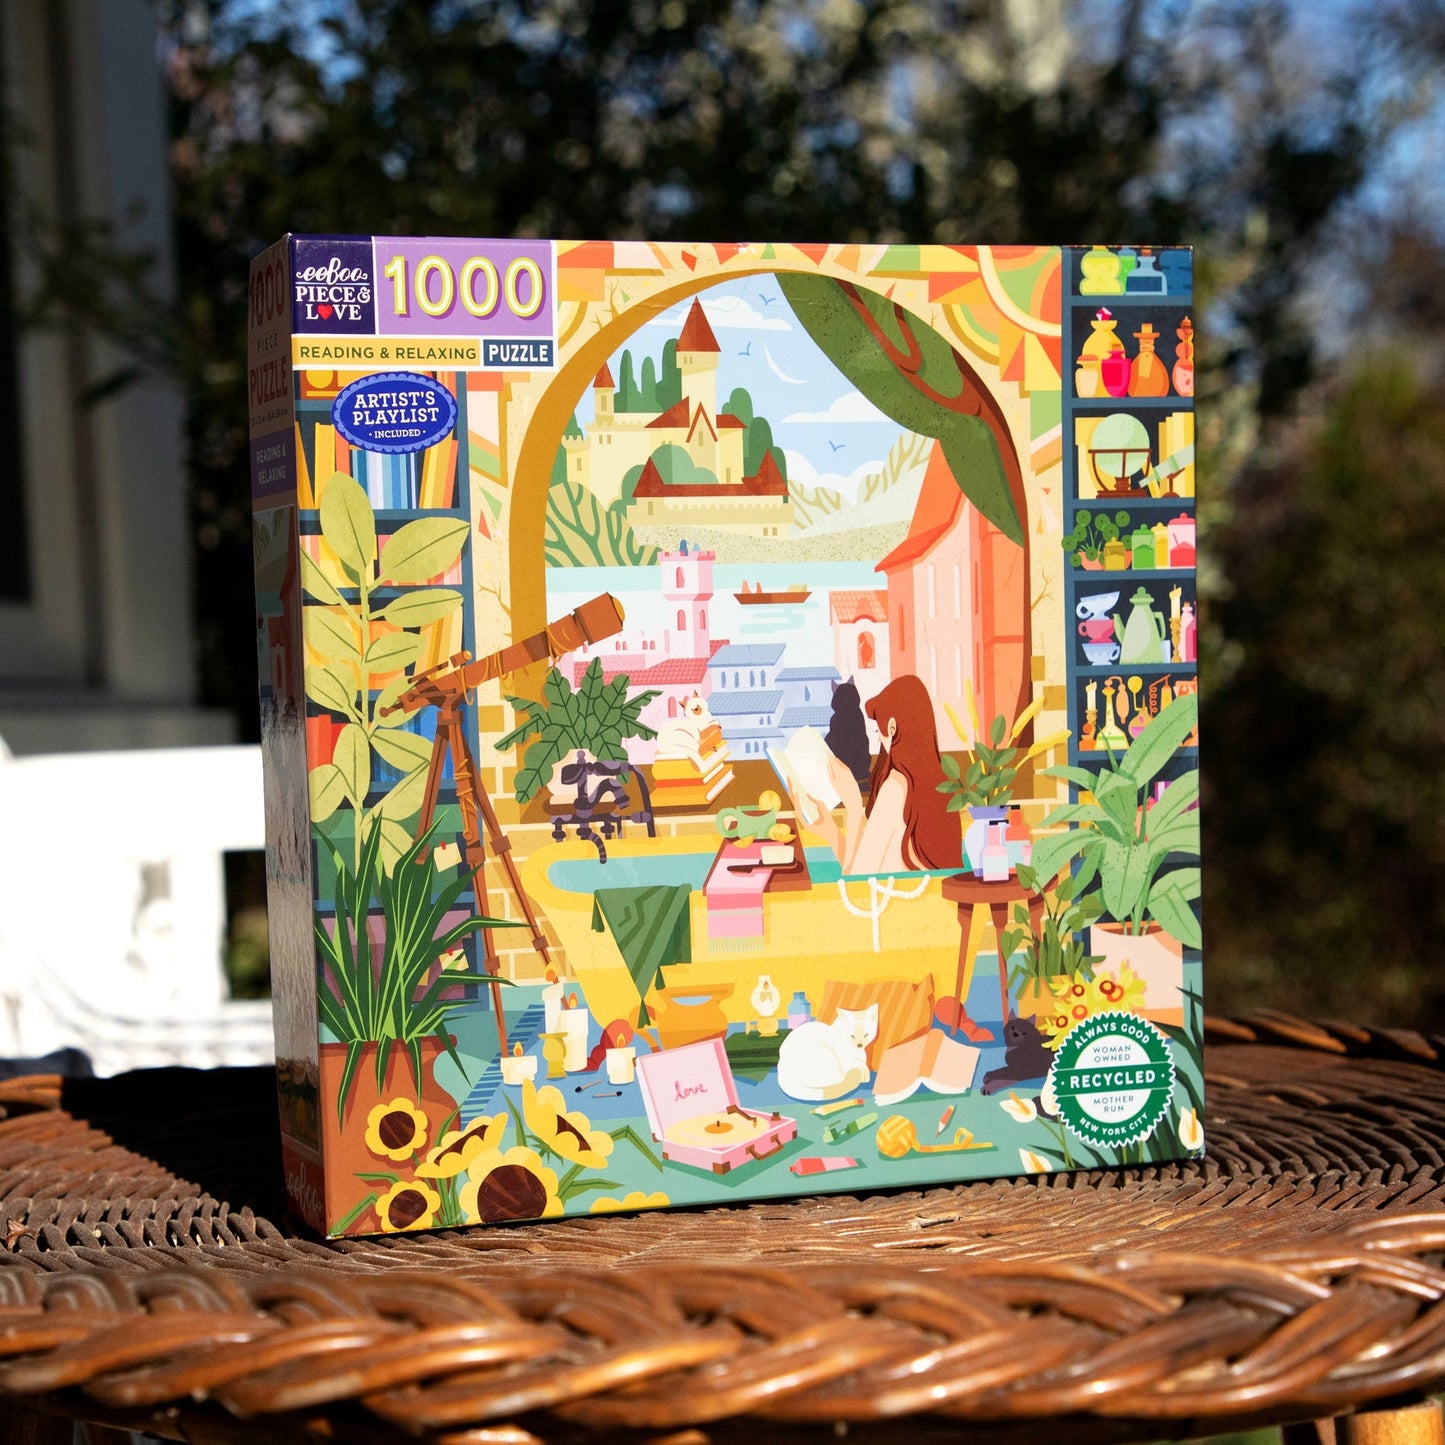 Reading & Relaxing 1000p Puzzle - eeboo